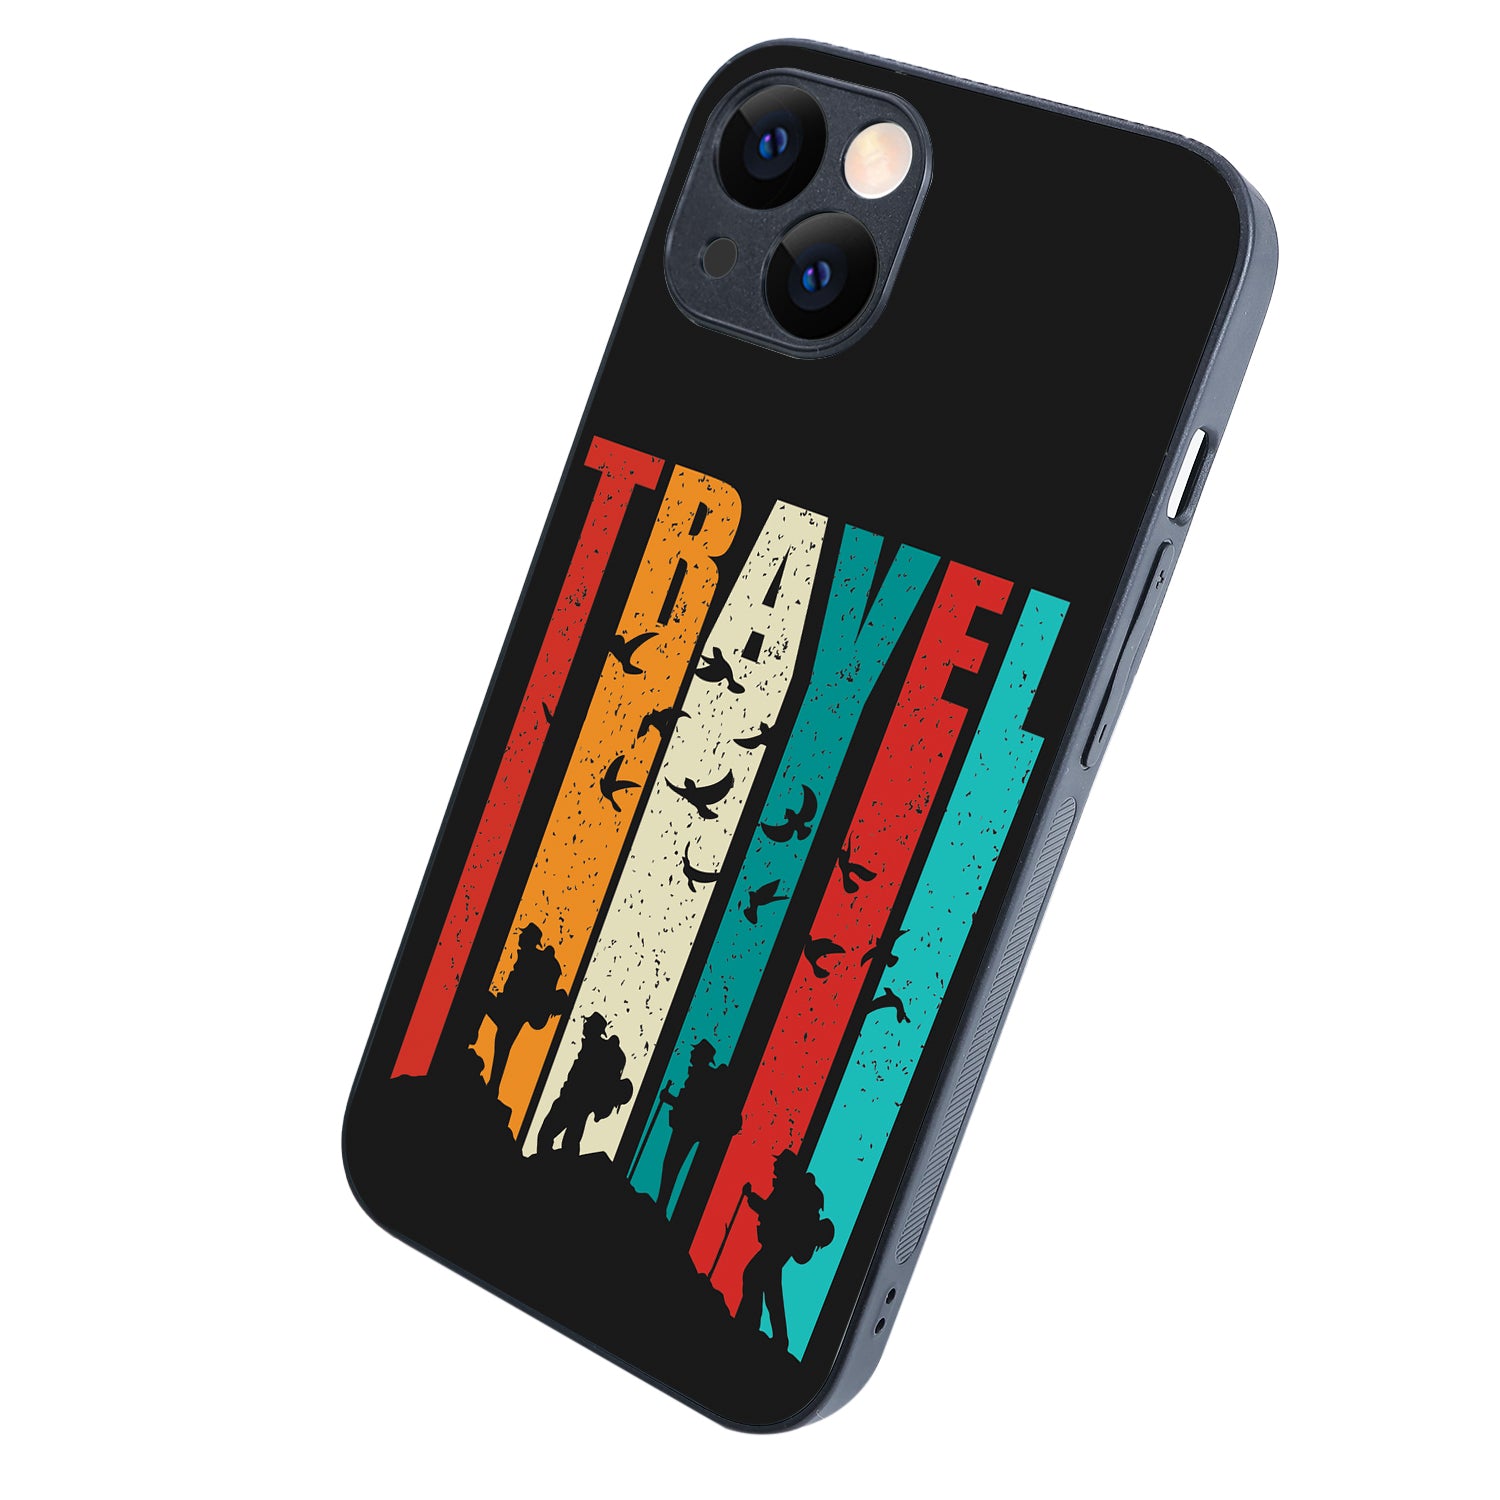 Travel Travelling iPhone 13 Case